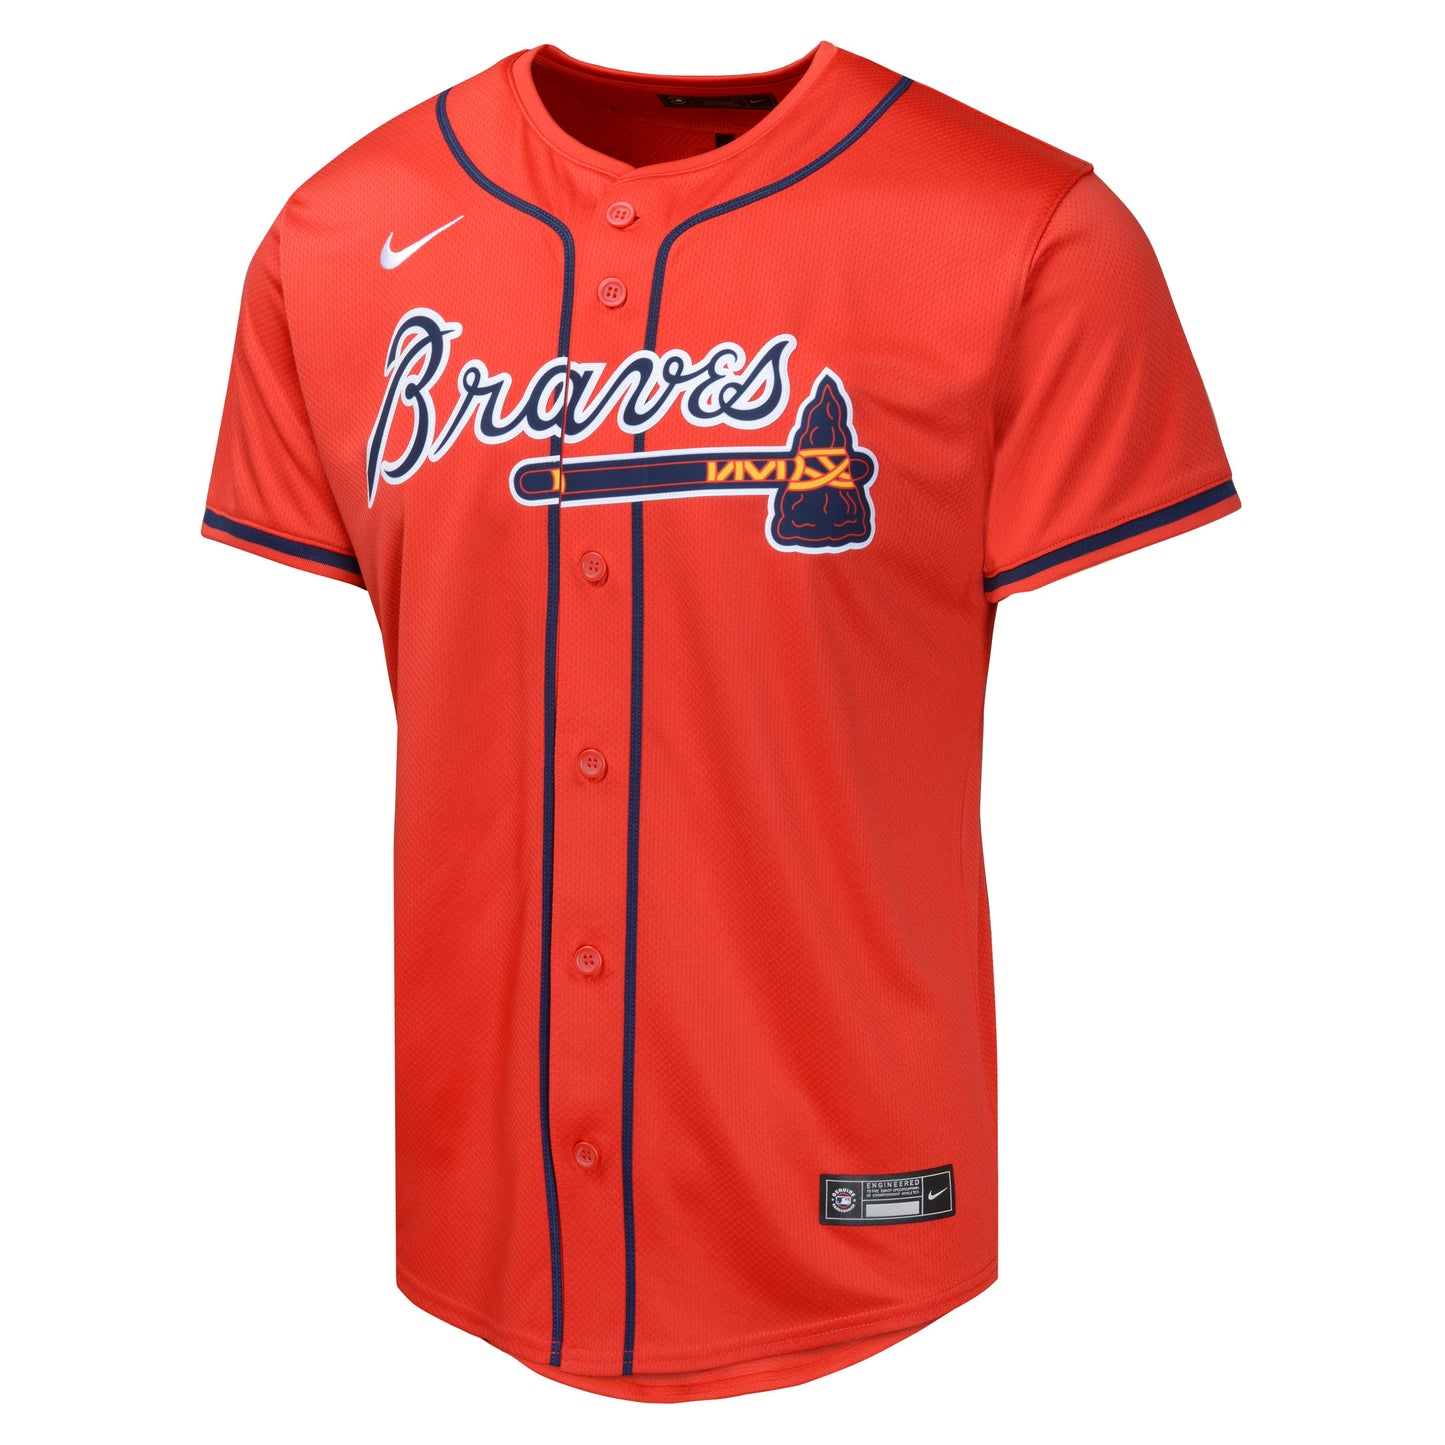 Youth Ronald Acuna Jr. Atlanta Braves NIKE Red Alternate Limited Replica Jersey